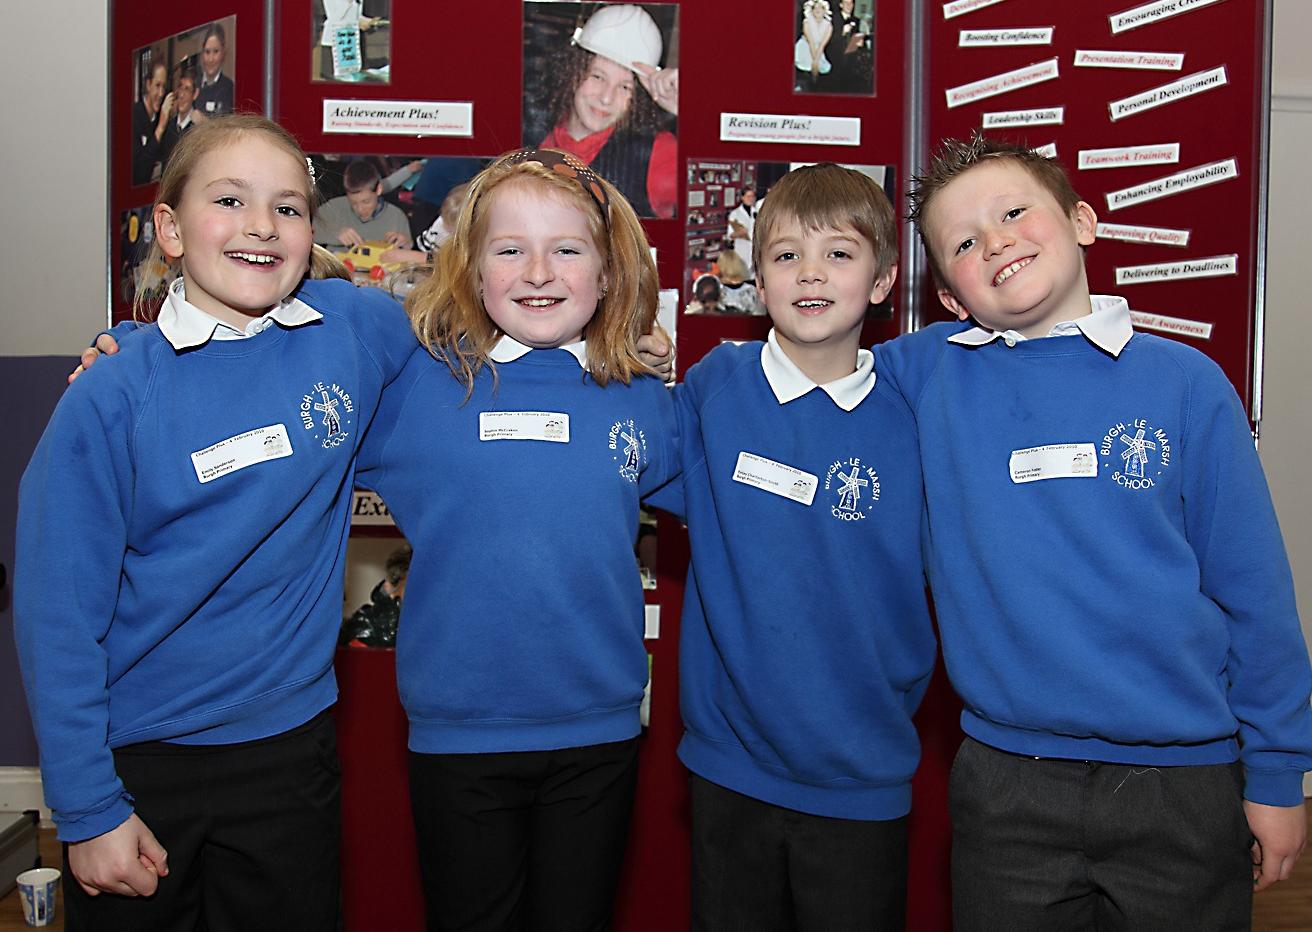 Pictured (from left) Emily Sanderson, Sophie McCraken, Finlay Chatterton-Smith and Cameron Foster.